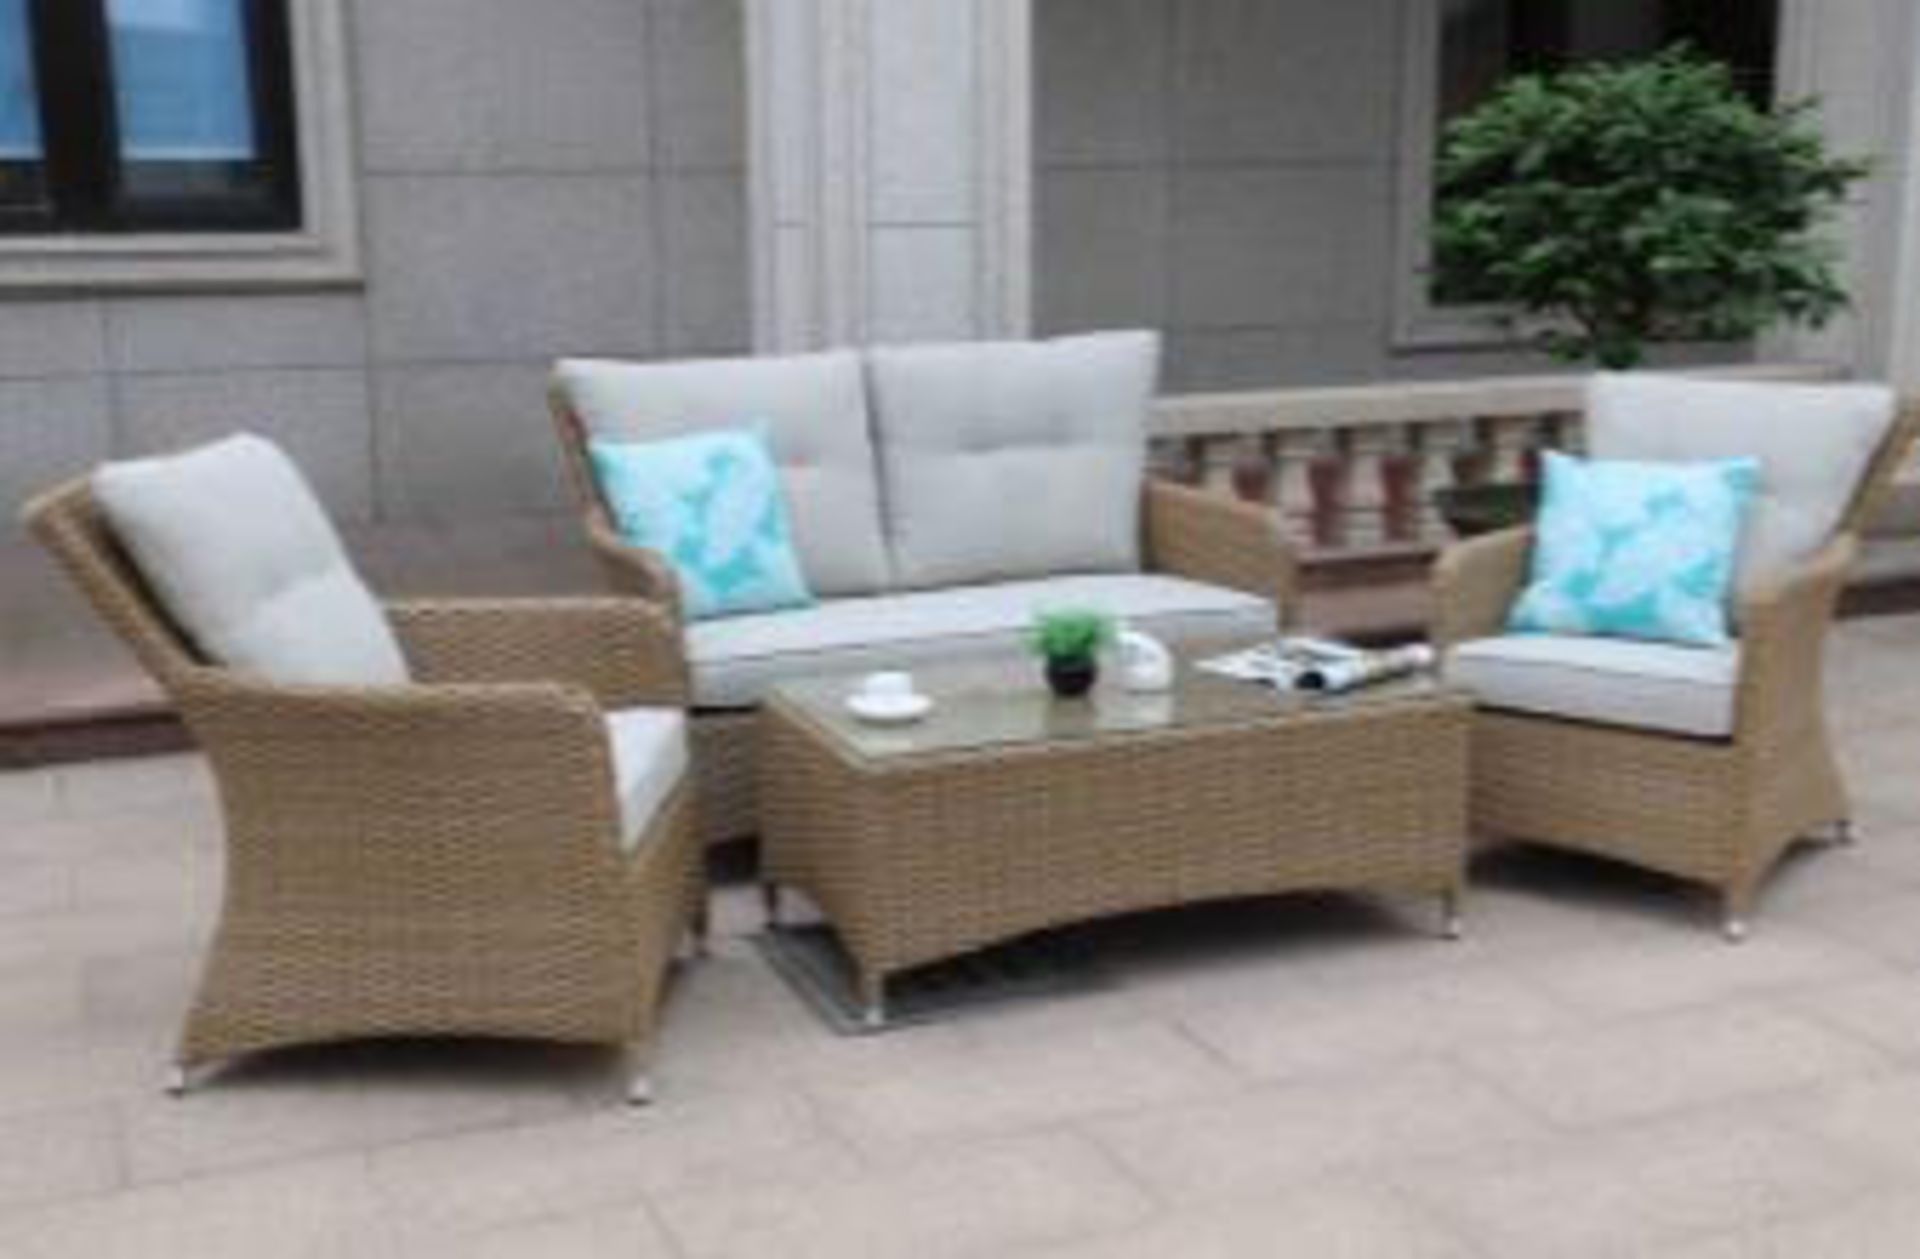 + VAT Brand New Chelsea Garden Company Beige Double Sofa + 2 ArmChair Set - Item Is Available From